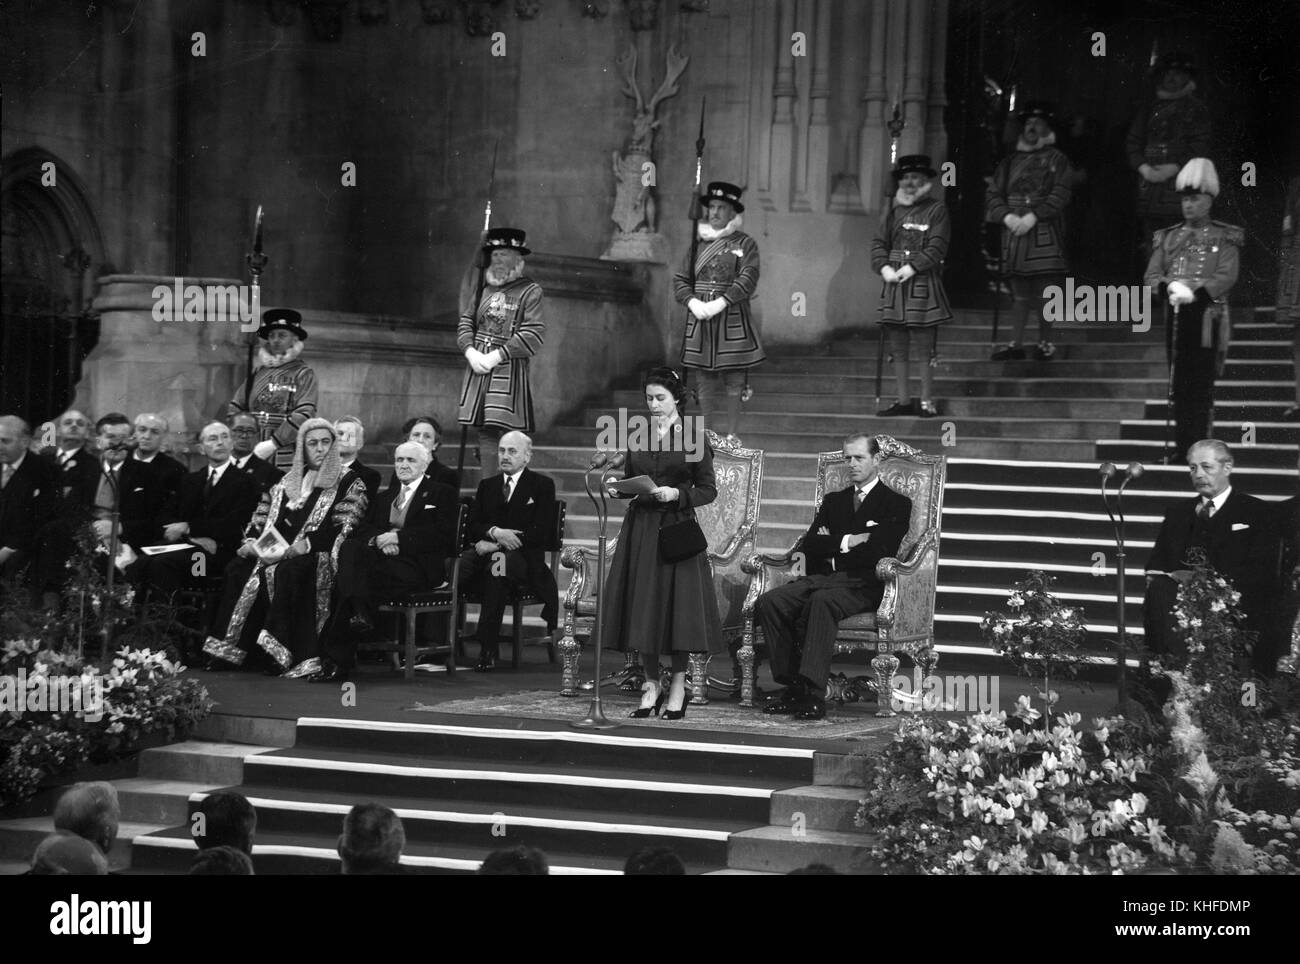 Queen Elizabeth II at the opening of the 46th Inter-Parliamentary Conference in Westminster Hall London September 12th 1957 Stock Photo